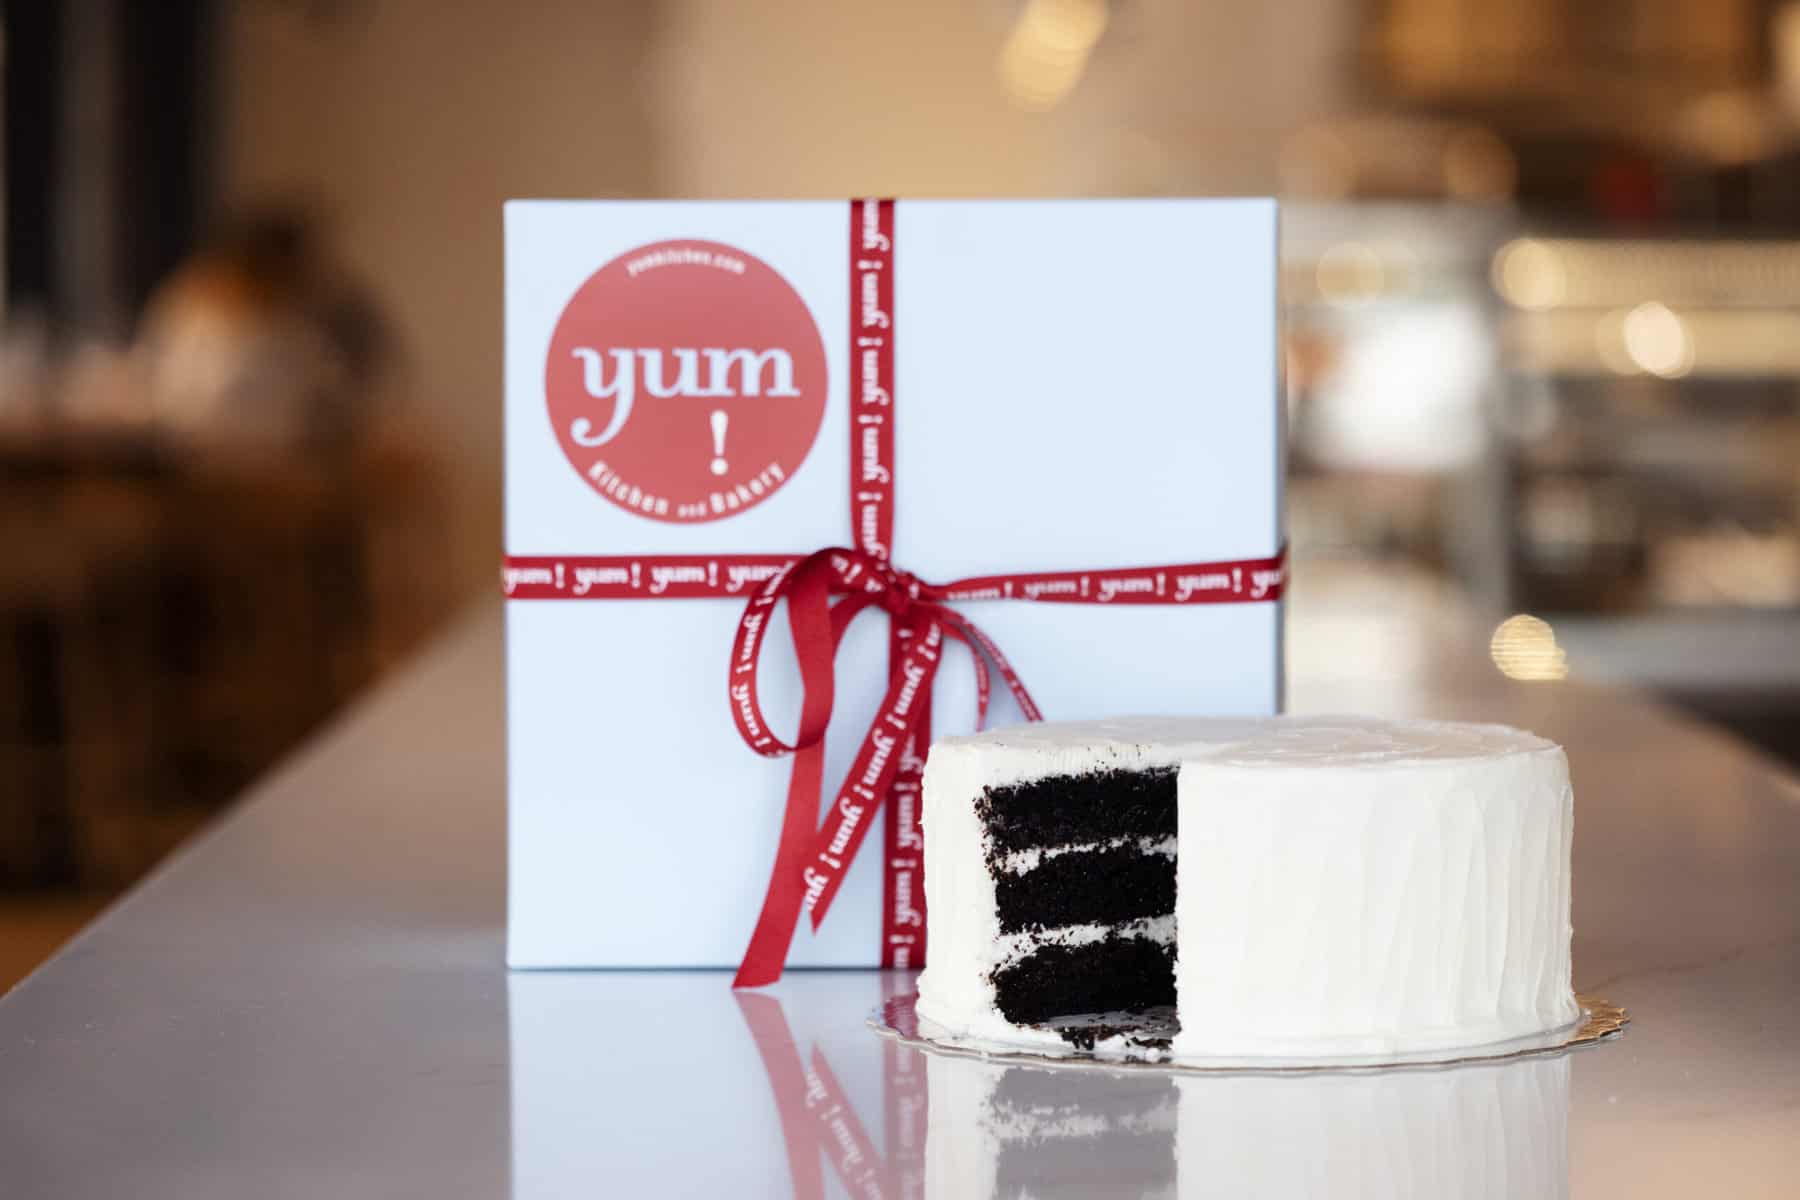 signature patticake with iconic blue box with yum! red ribbon from yum! Kitchen in Bakery in St. Louis Park, Minnesota.